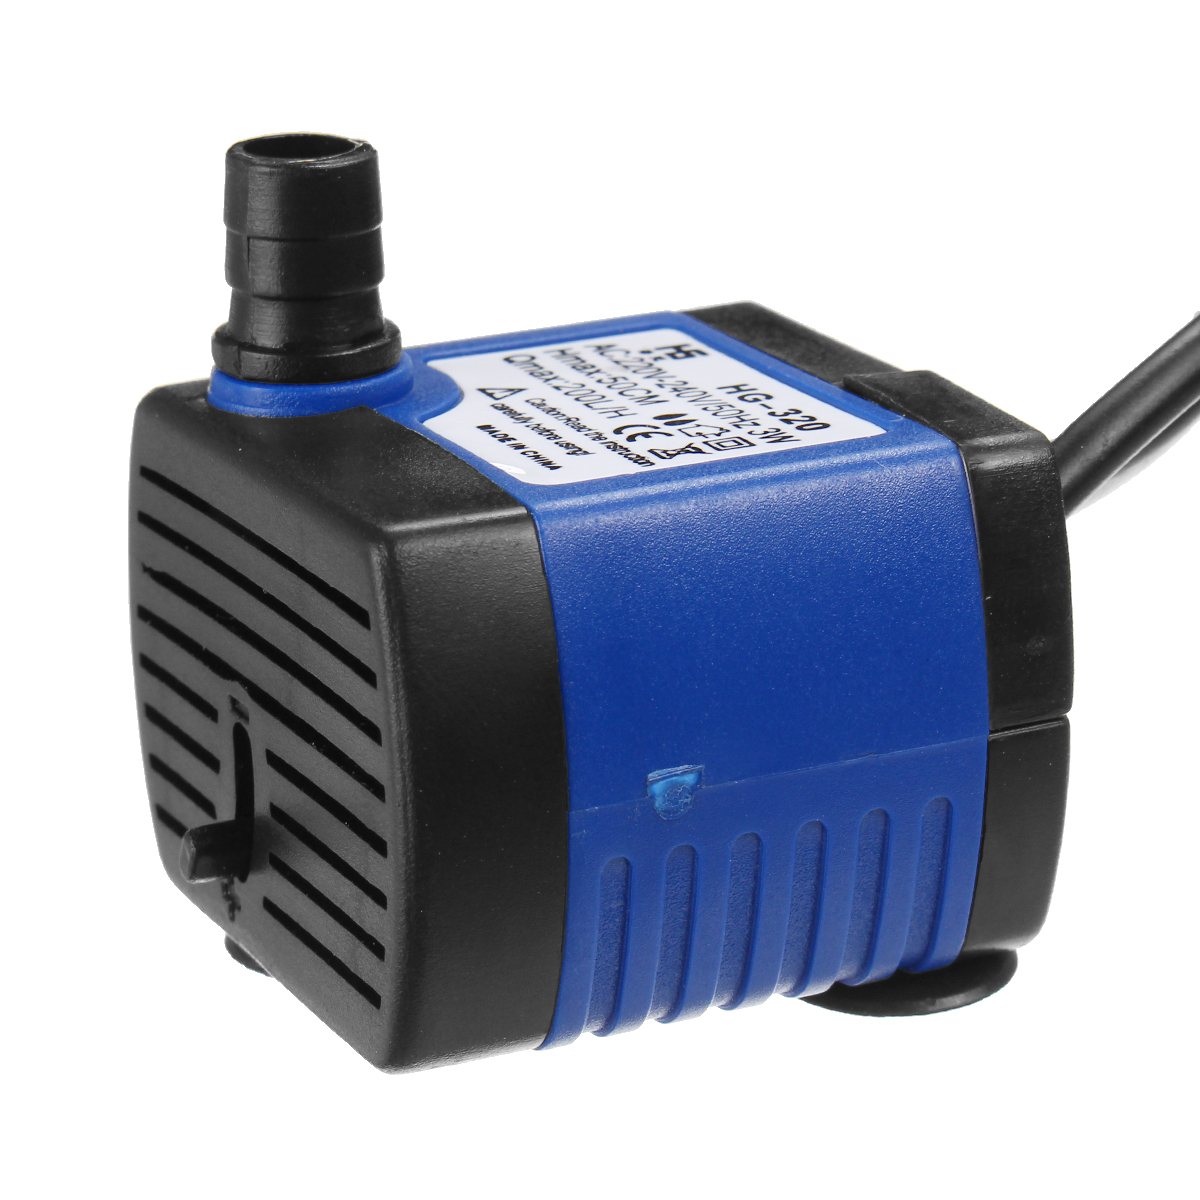 

Submersible Water Pump 3W 4 Led Lift 0.5m 220L/H Submersible Pump AC220V